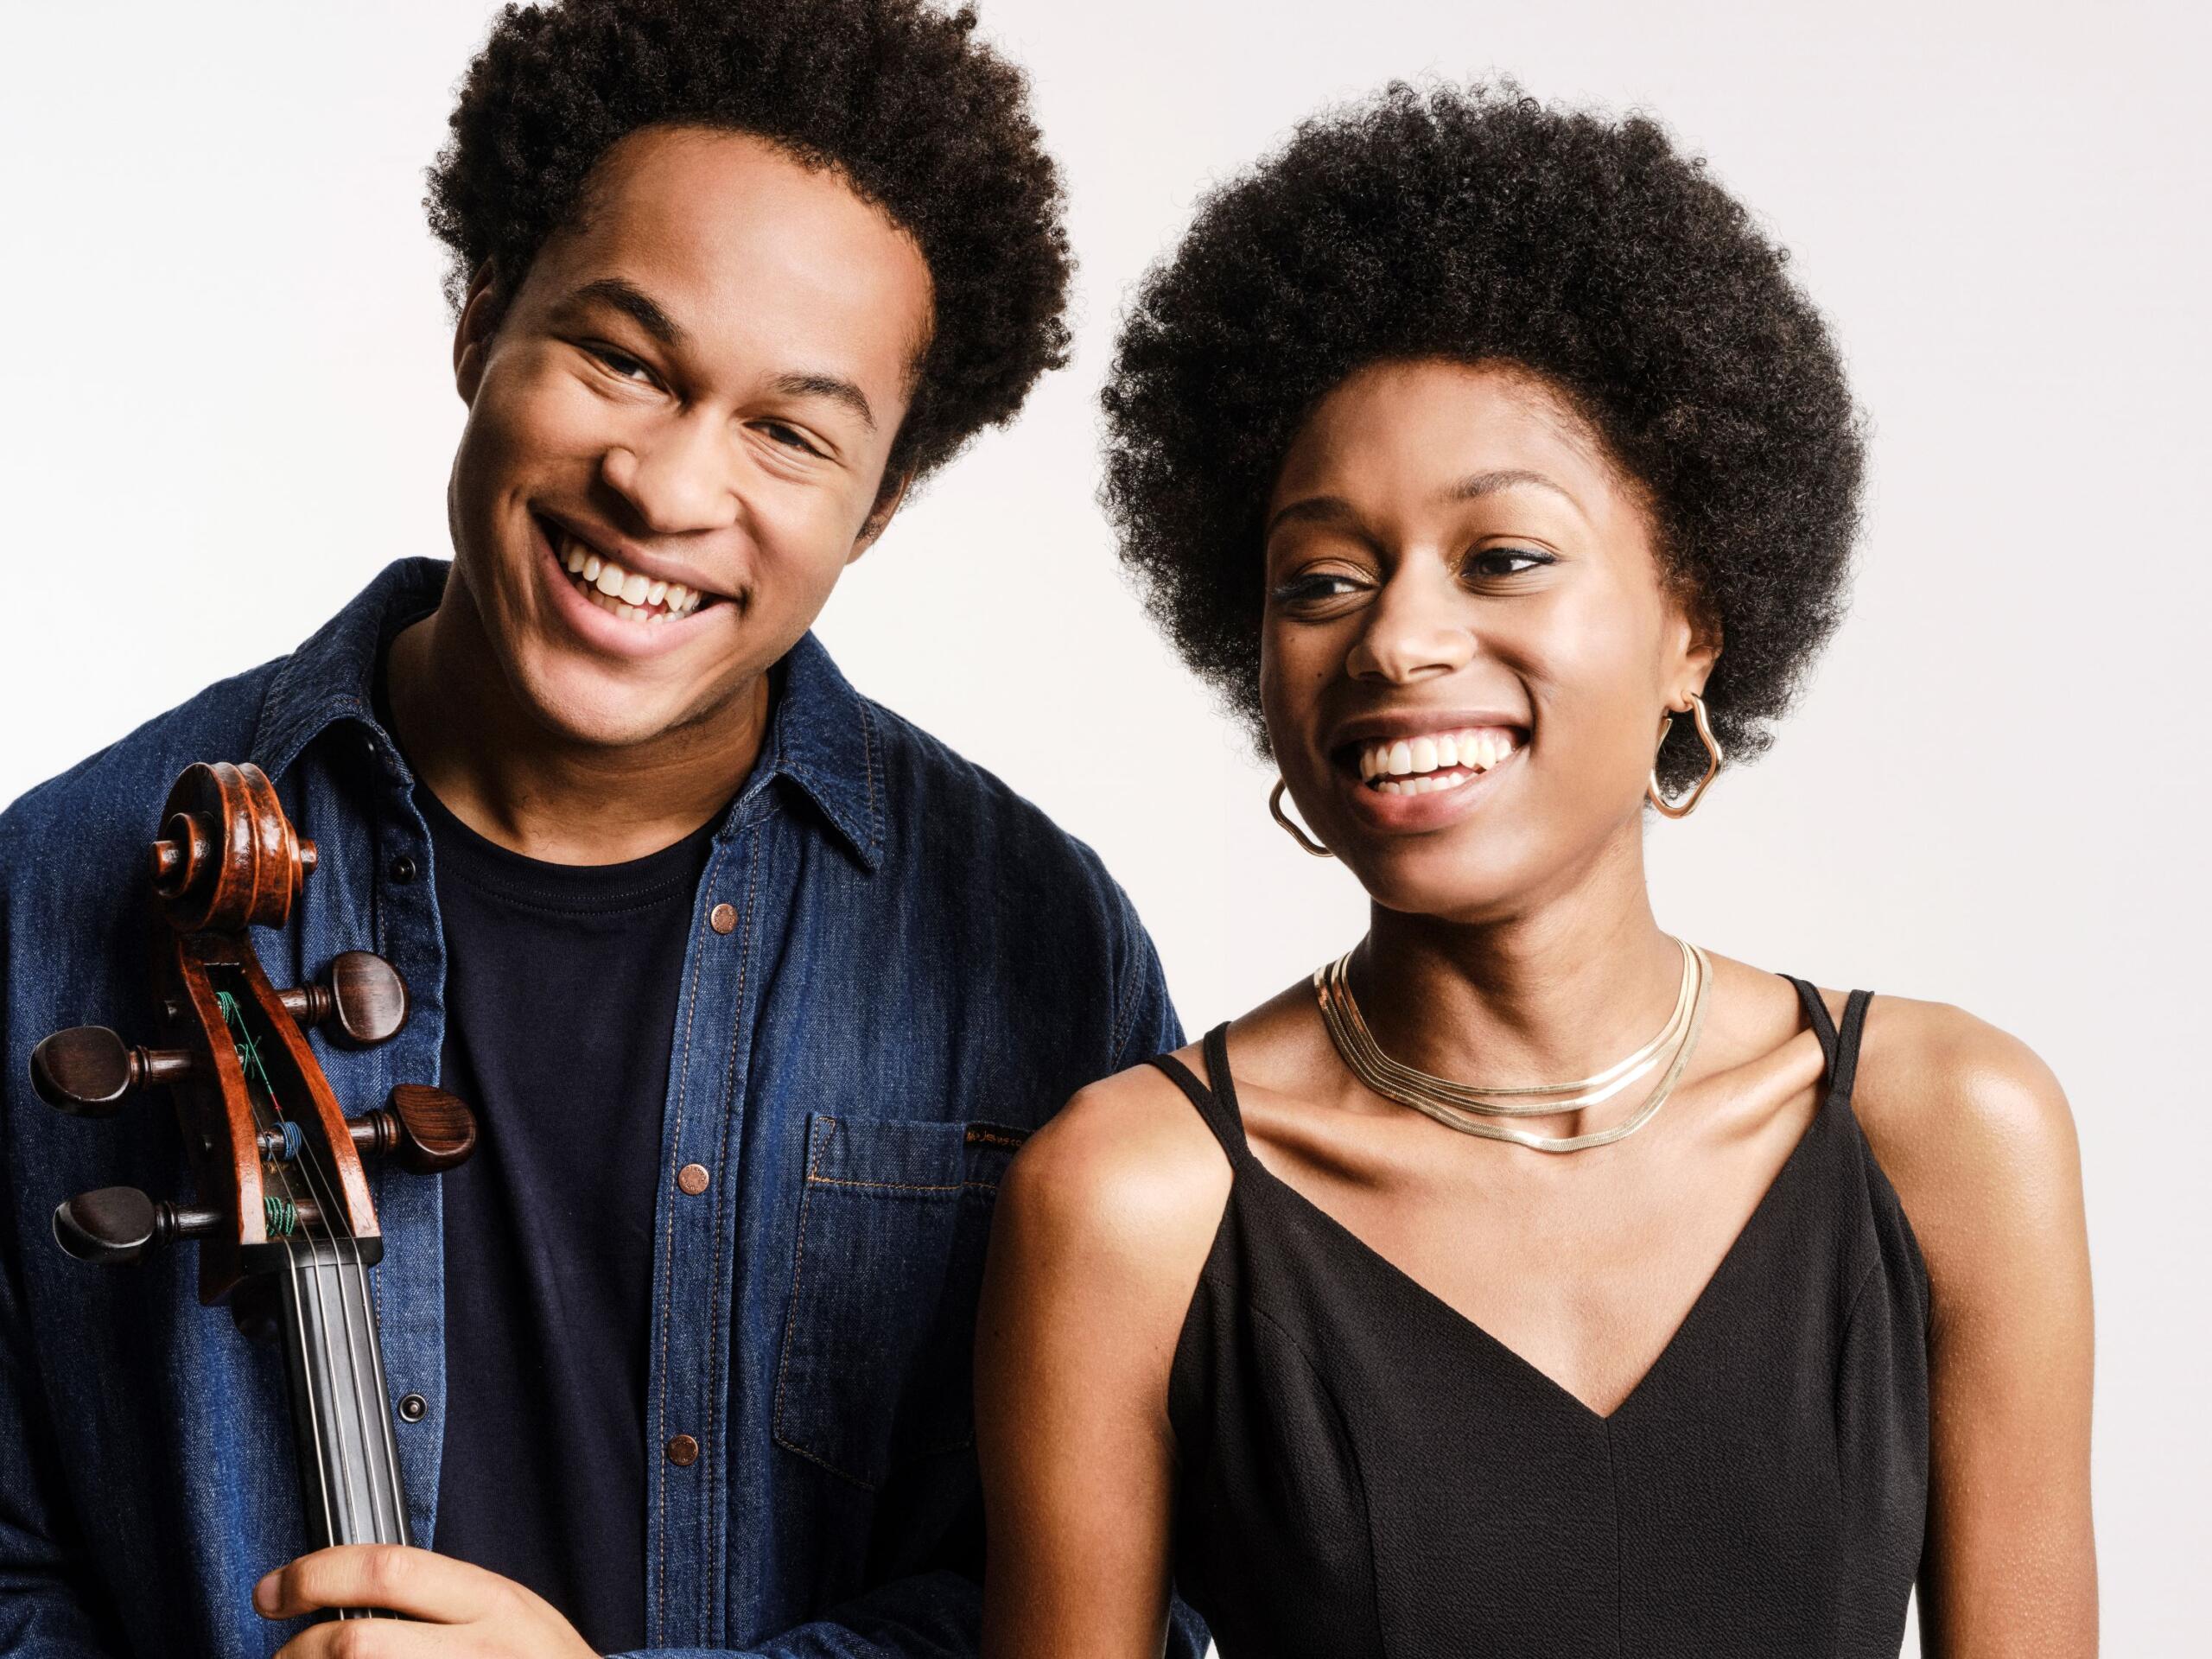 A young man and a young woman close to each other, they both have Afro hairstyles and laugh into the camera.